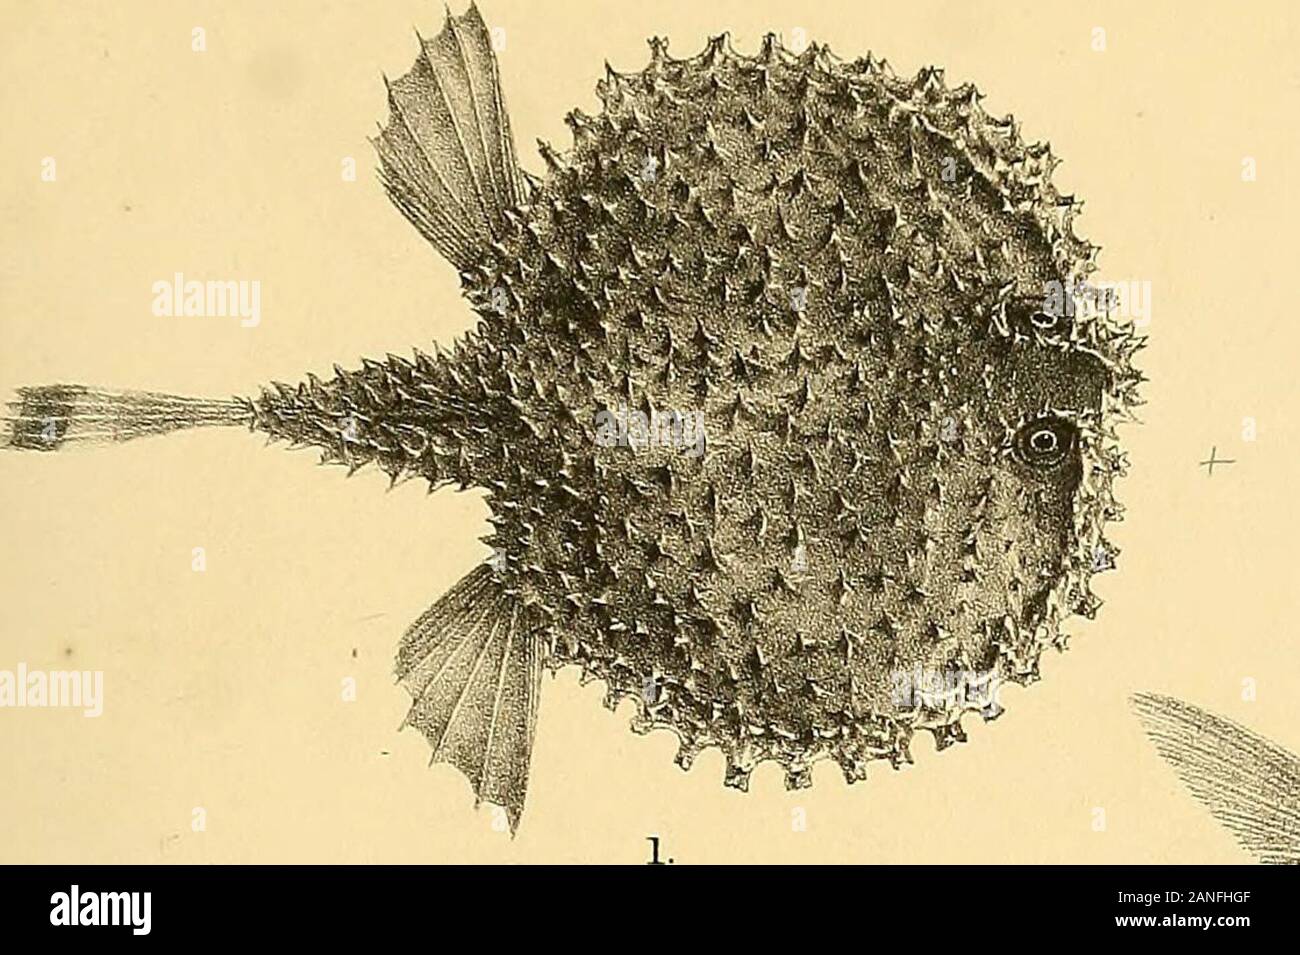 The fishes of India; being a natural history of the fishes known to inhabit the seas and fresh waters of India, Burma, and Ceylon . G H Ford del R.Mmtern lith l&n-ere Bros 3rop - G^ZZA MINUTA 2, LACTARIUS DELIGATULUS. 3- STROMATEUS CINEREUS (IMMATURE 4.. S NIGER 5 MEIIE MACULATA 6. CORYPafiNA HIPPURUS Days Fishes of India. Plate LN.. Stock Photo